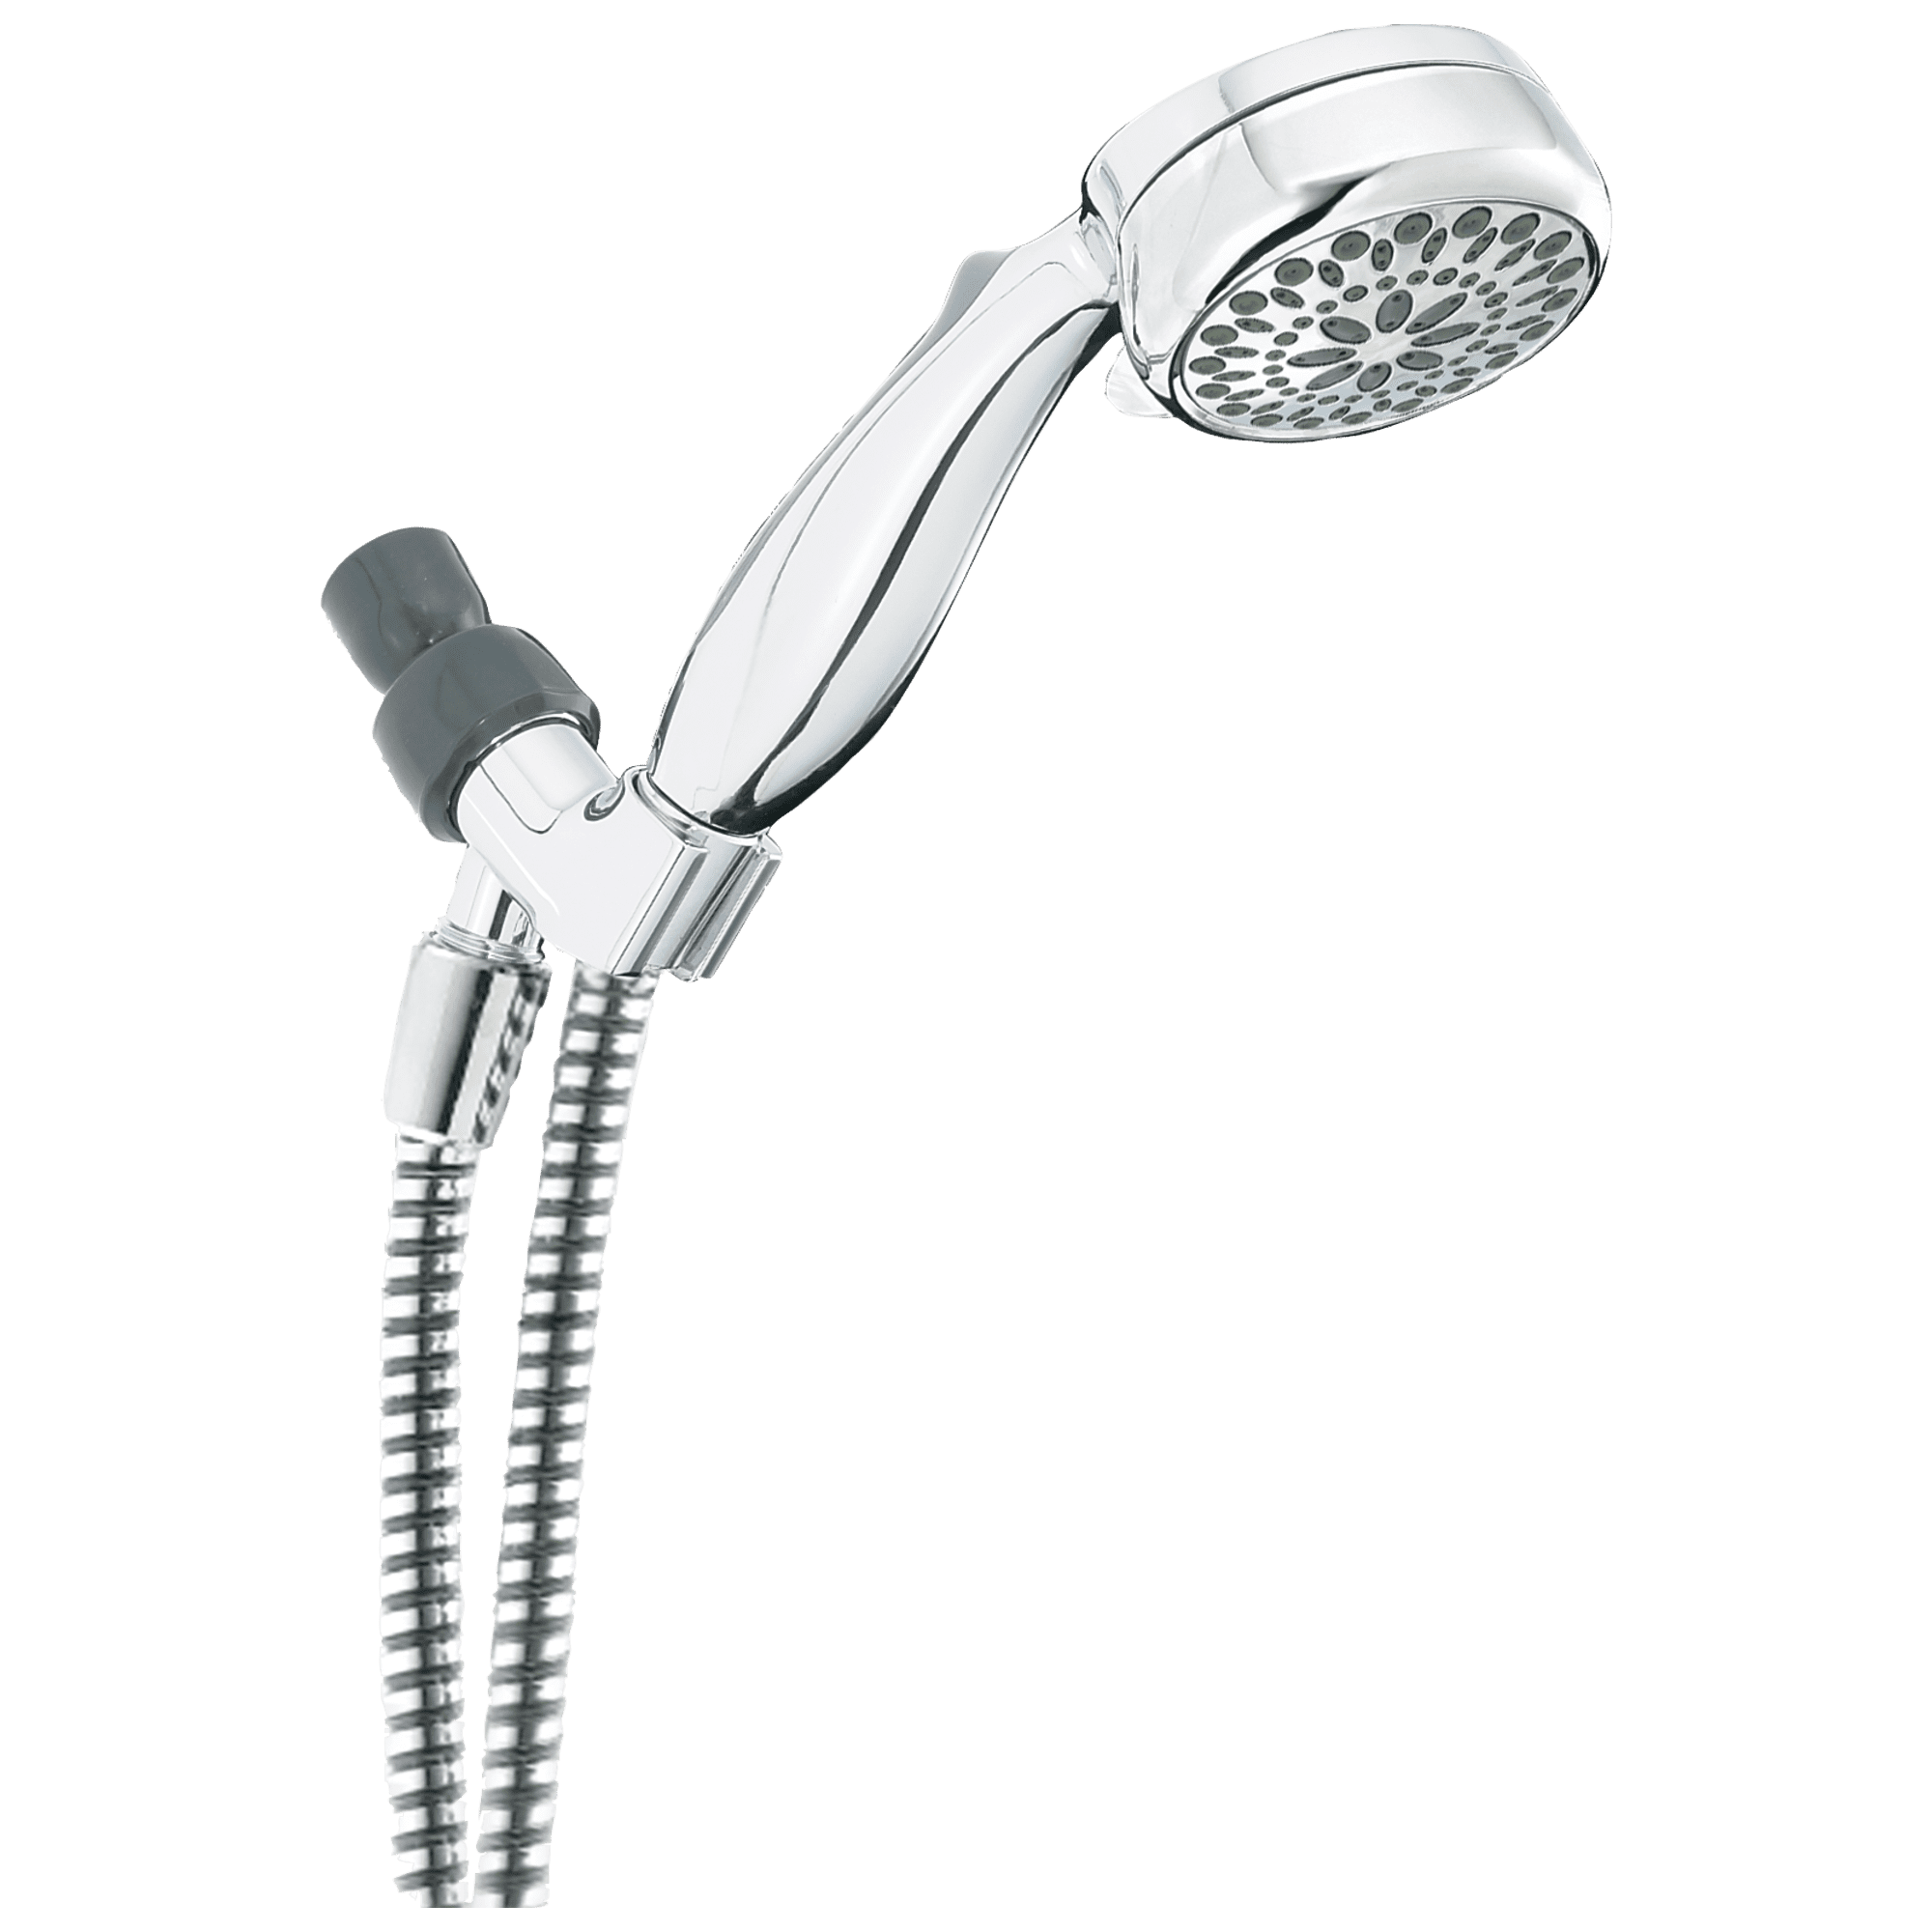 7-Setting Wall Mount Hand Shower with Cleaning Spray in Lumicoat Chrome